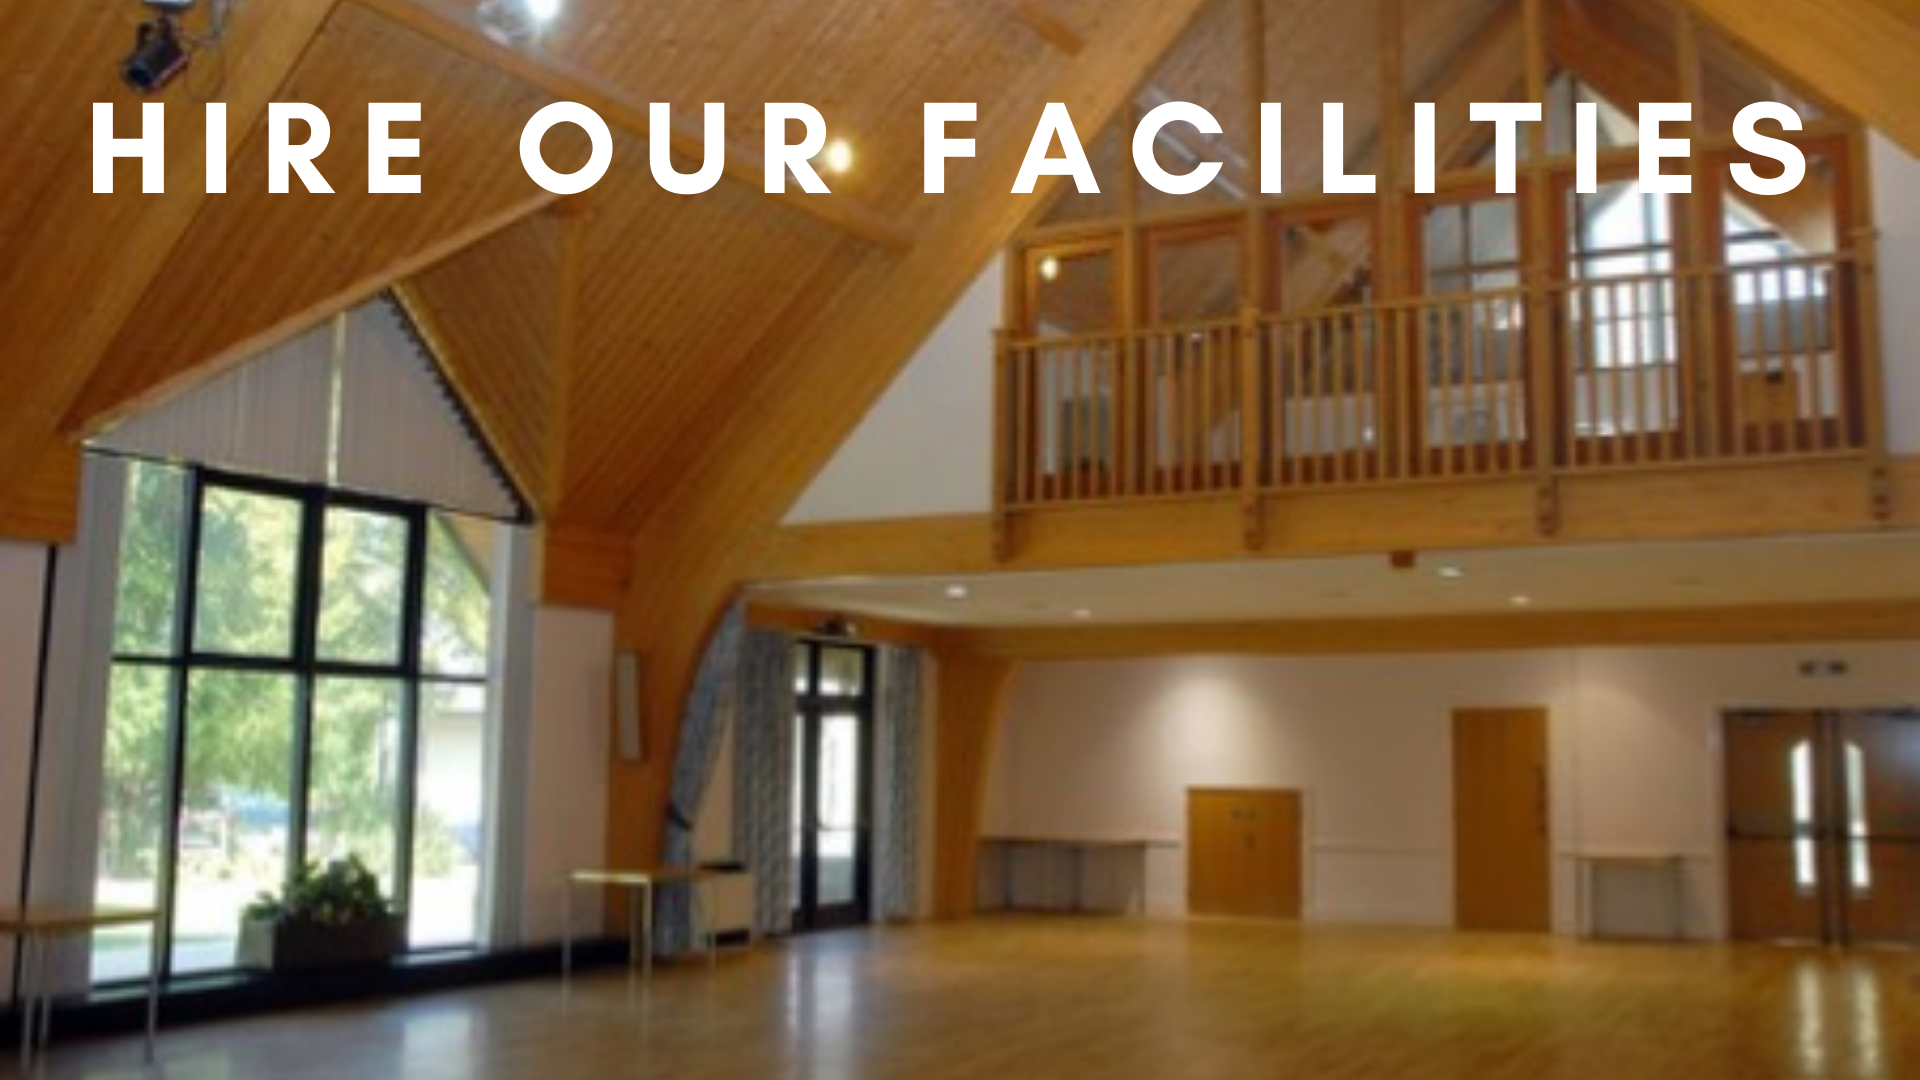 HIRE OUR FACILITIES